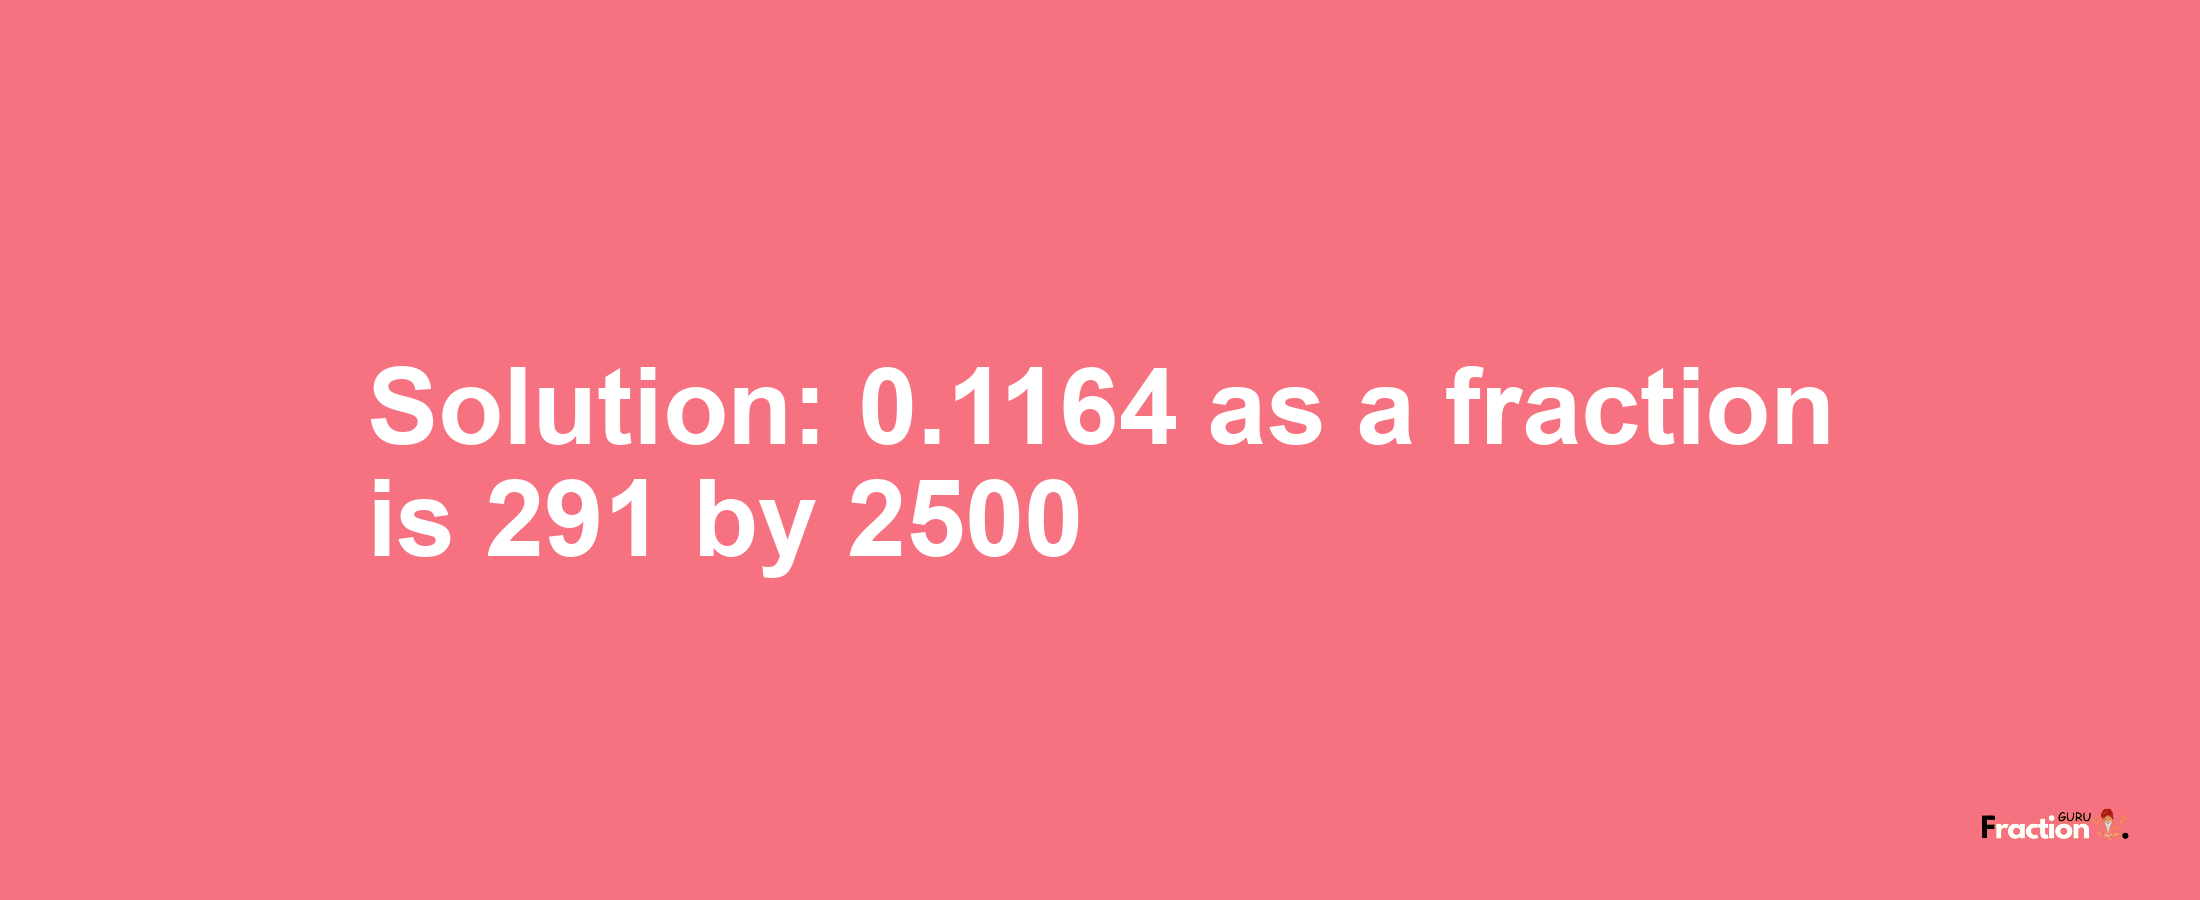 Solution:0.1164 as a fraction is 291/2500